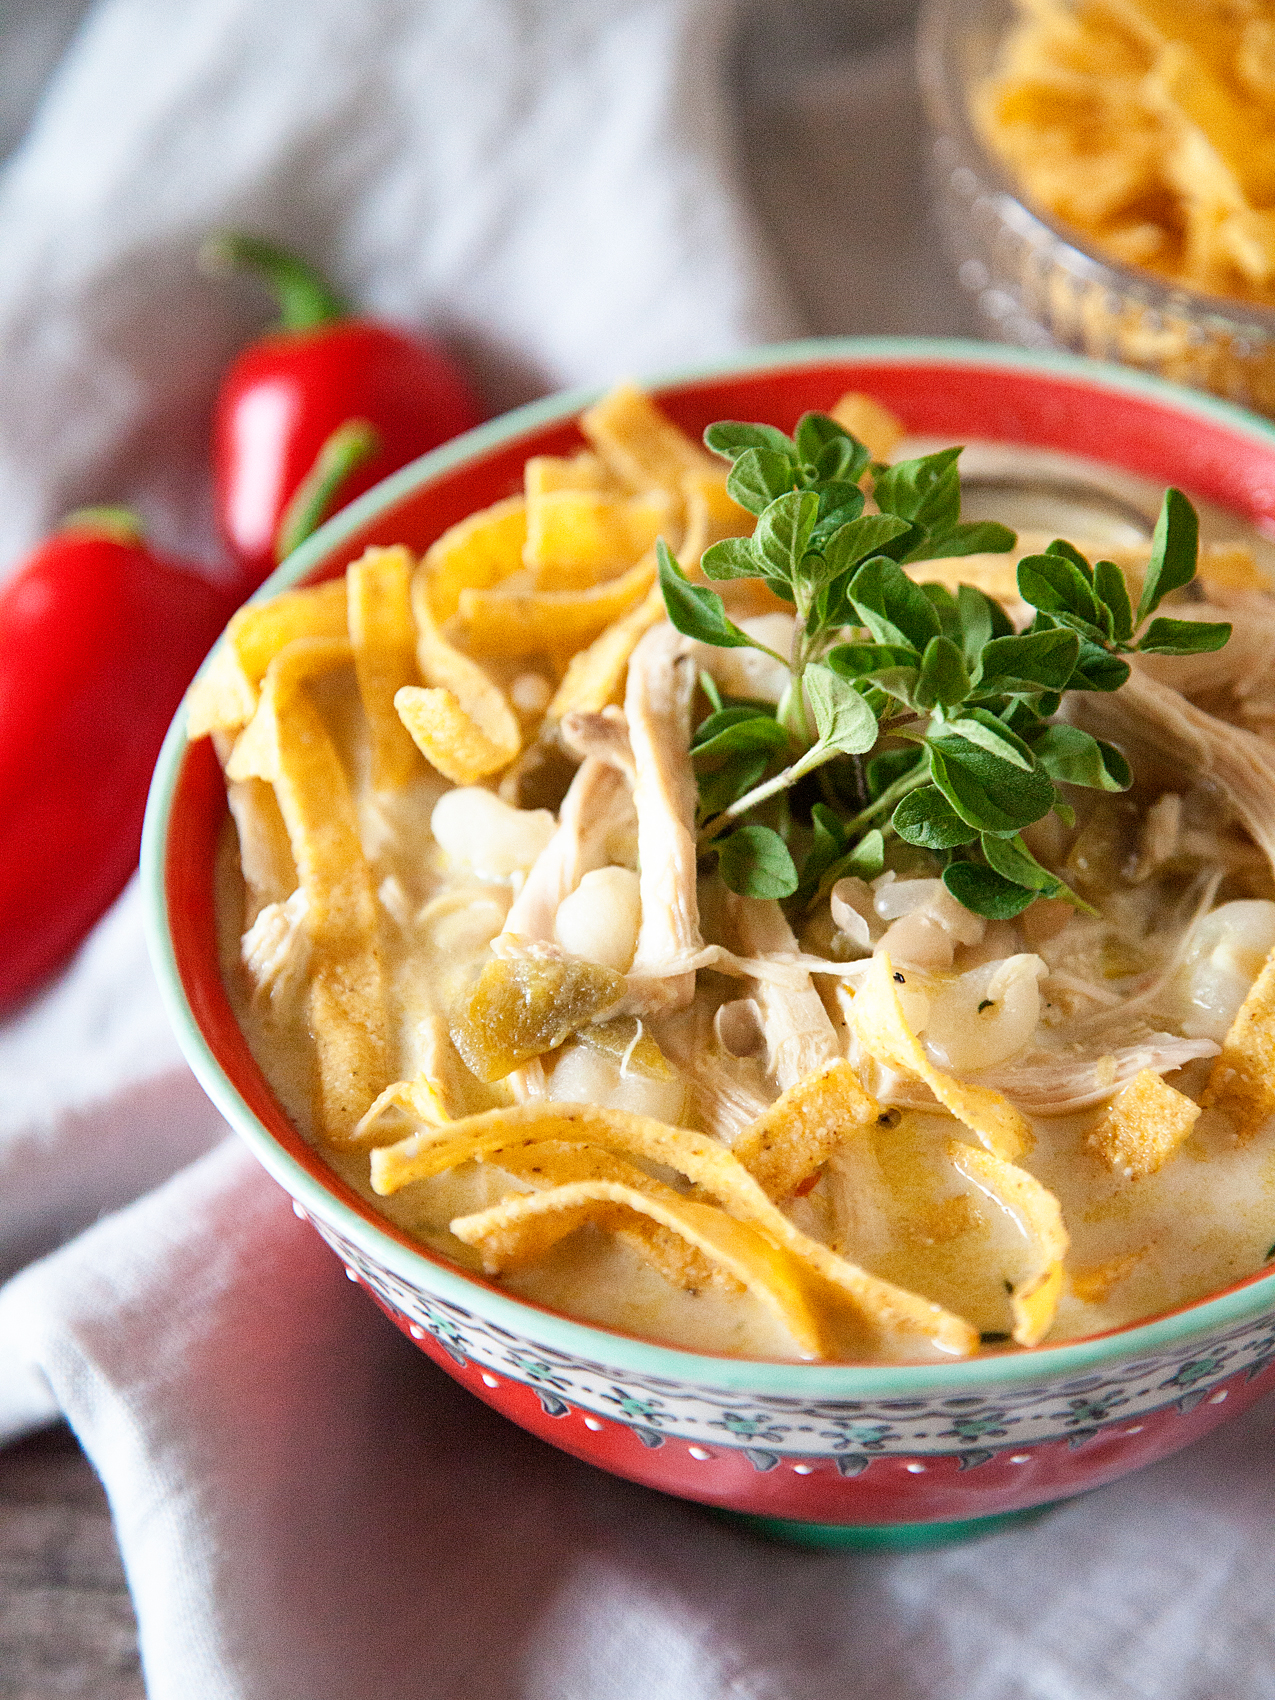 Simple Weeknight White Chicken Chili Recipe from WhipperBerry